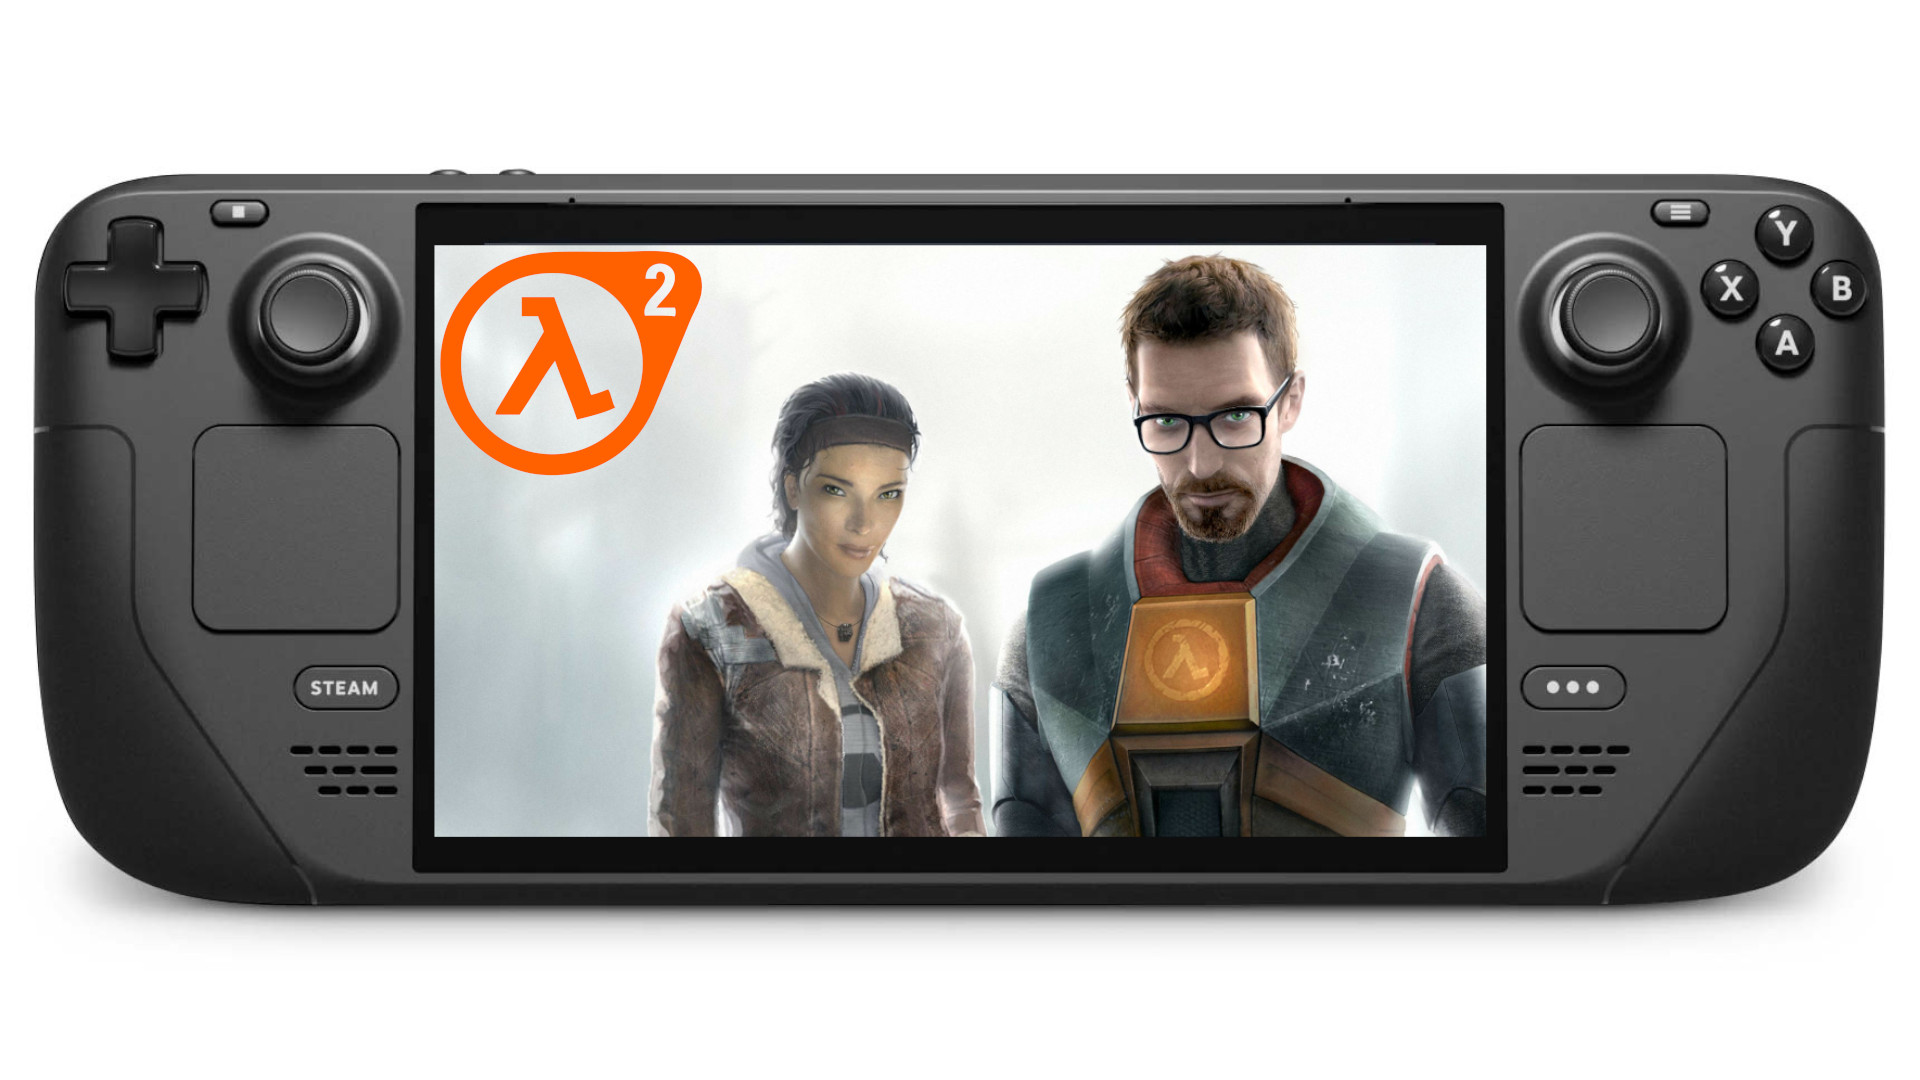 Valve prepares Half-Life 2 for the Steam Deck with its largest patch in over 10 years